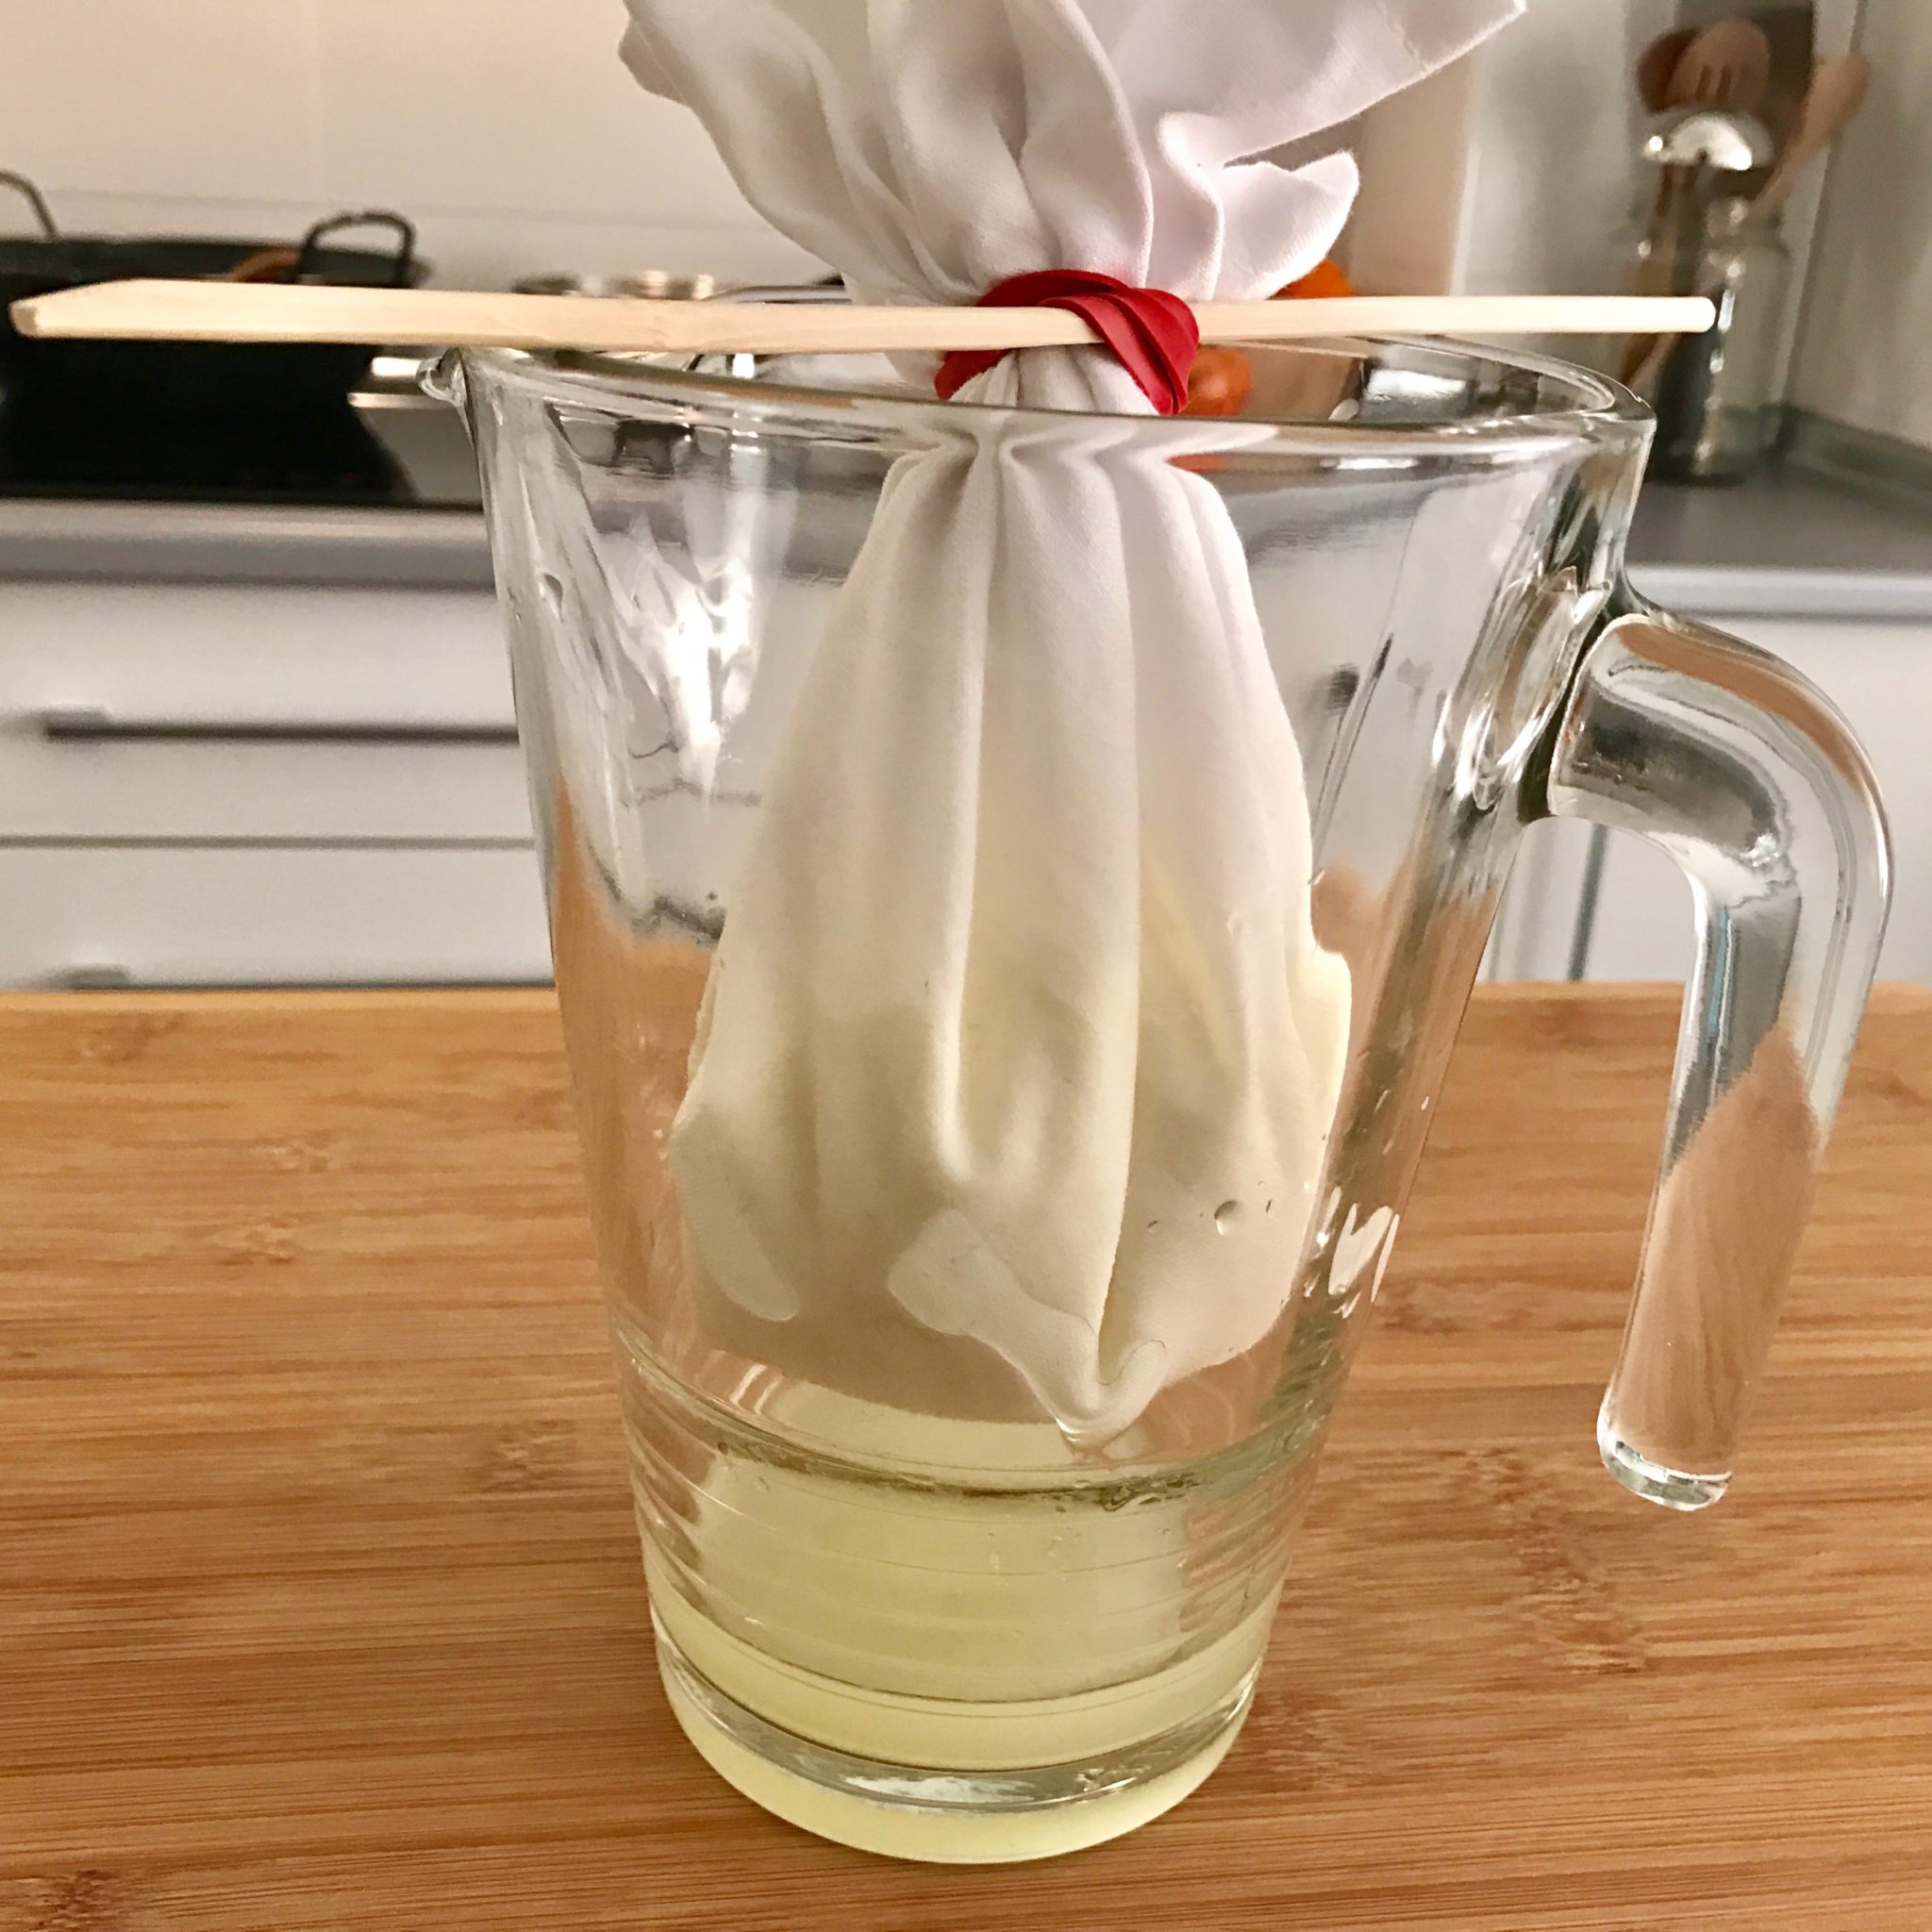 tie the napkin with the rubber band, insert the stick through and hang it on the pitcher